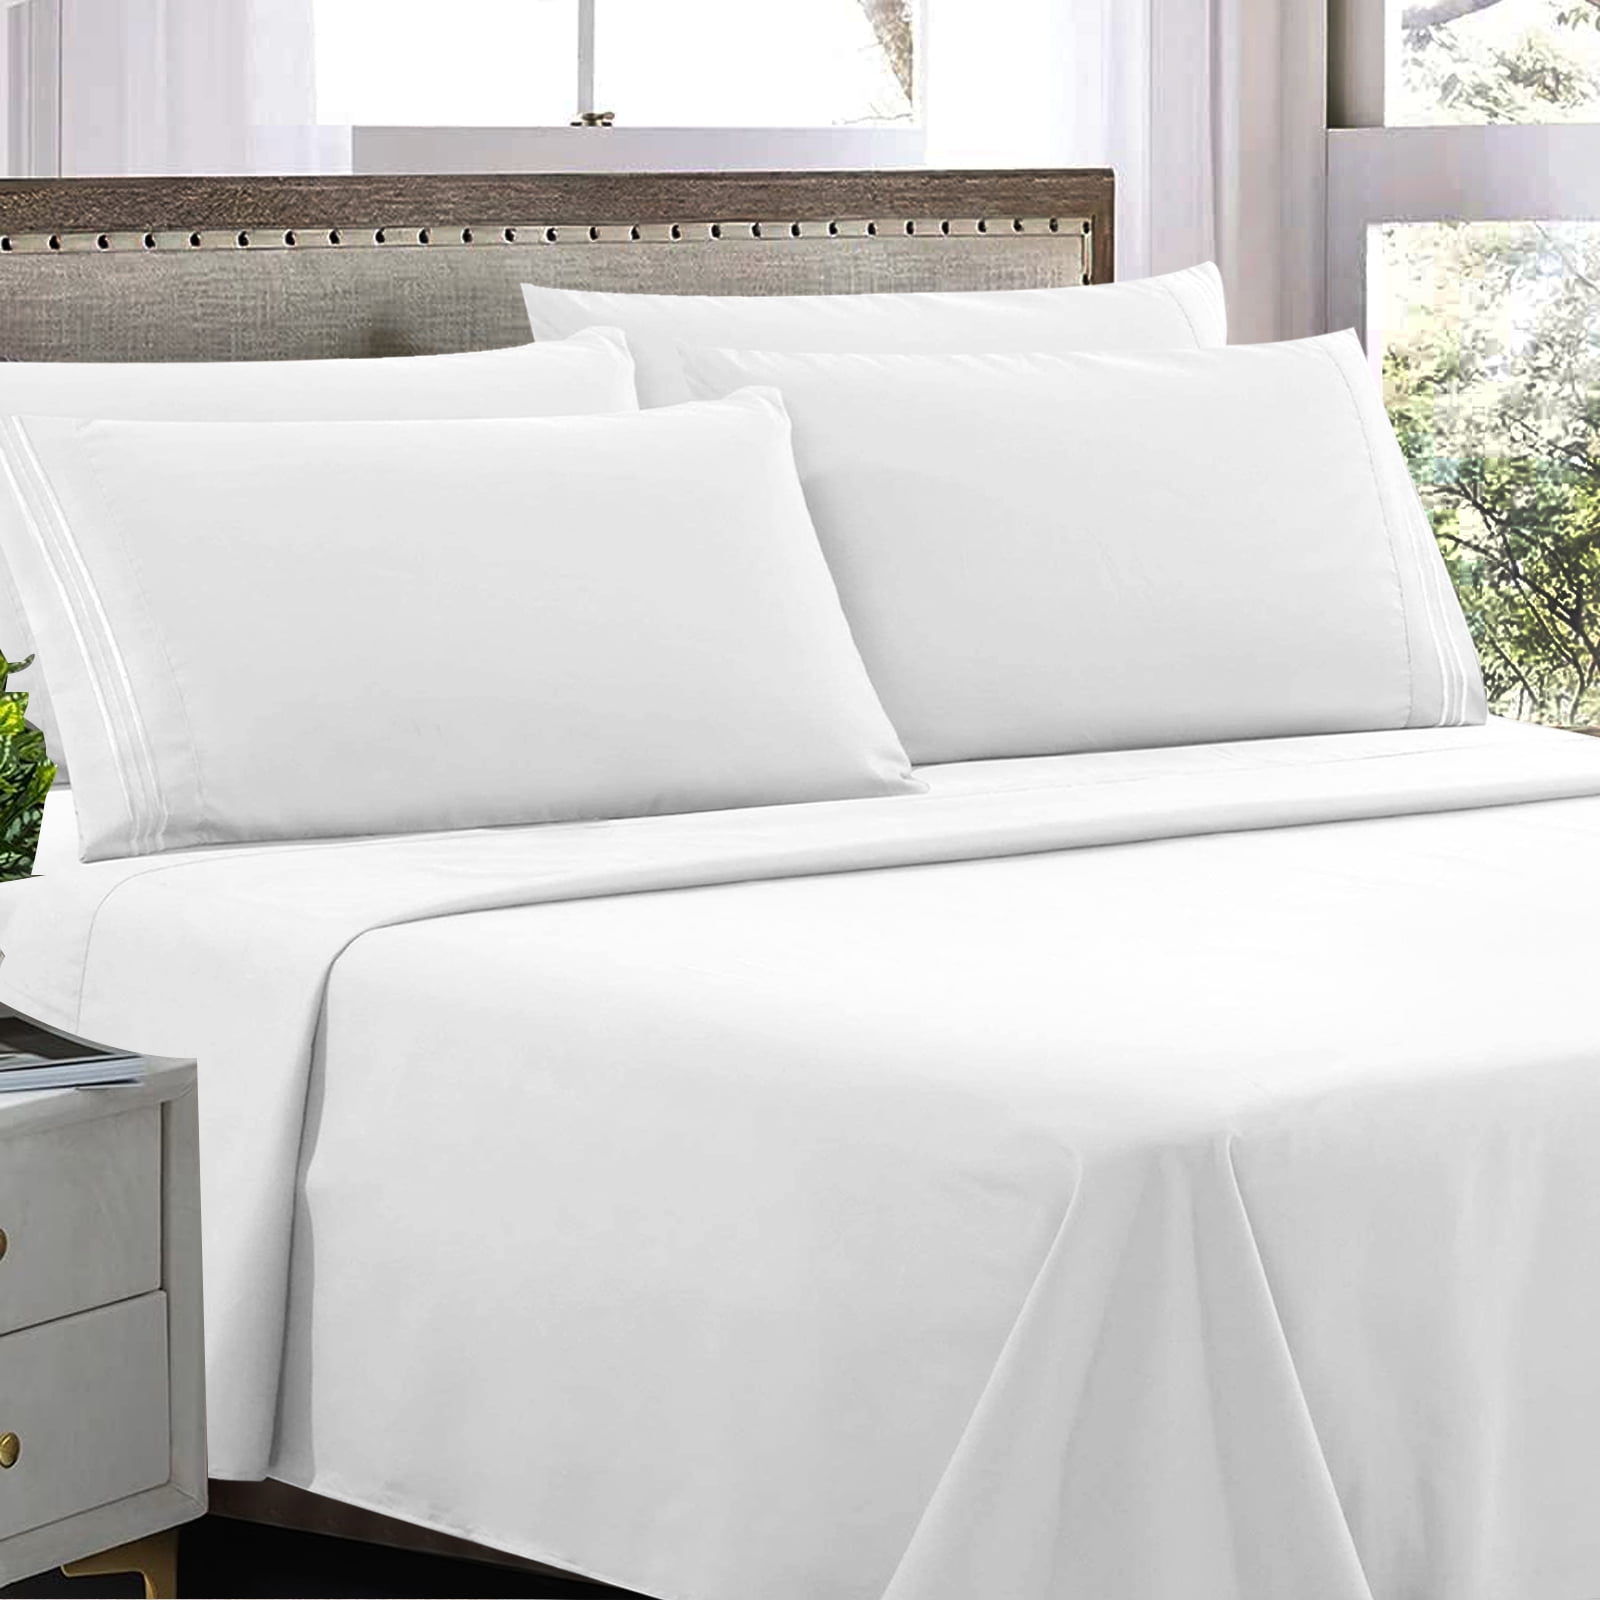 Details about   Wine Striped Comfort Bedding Collection 1000 Thread Count AU Sizes Select Item 